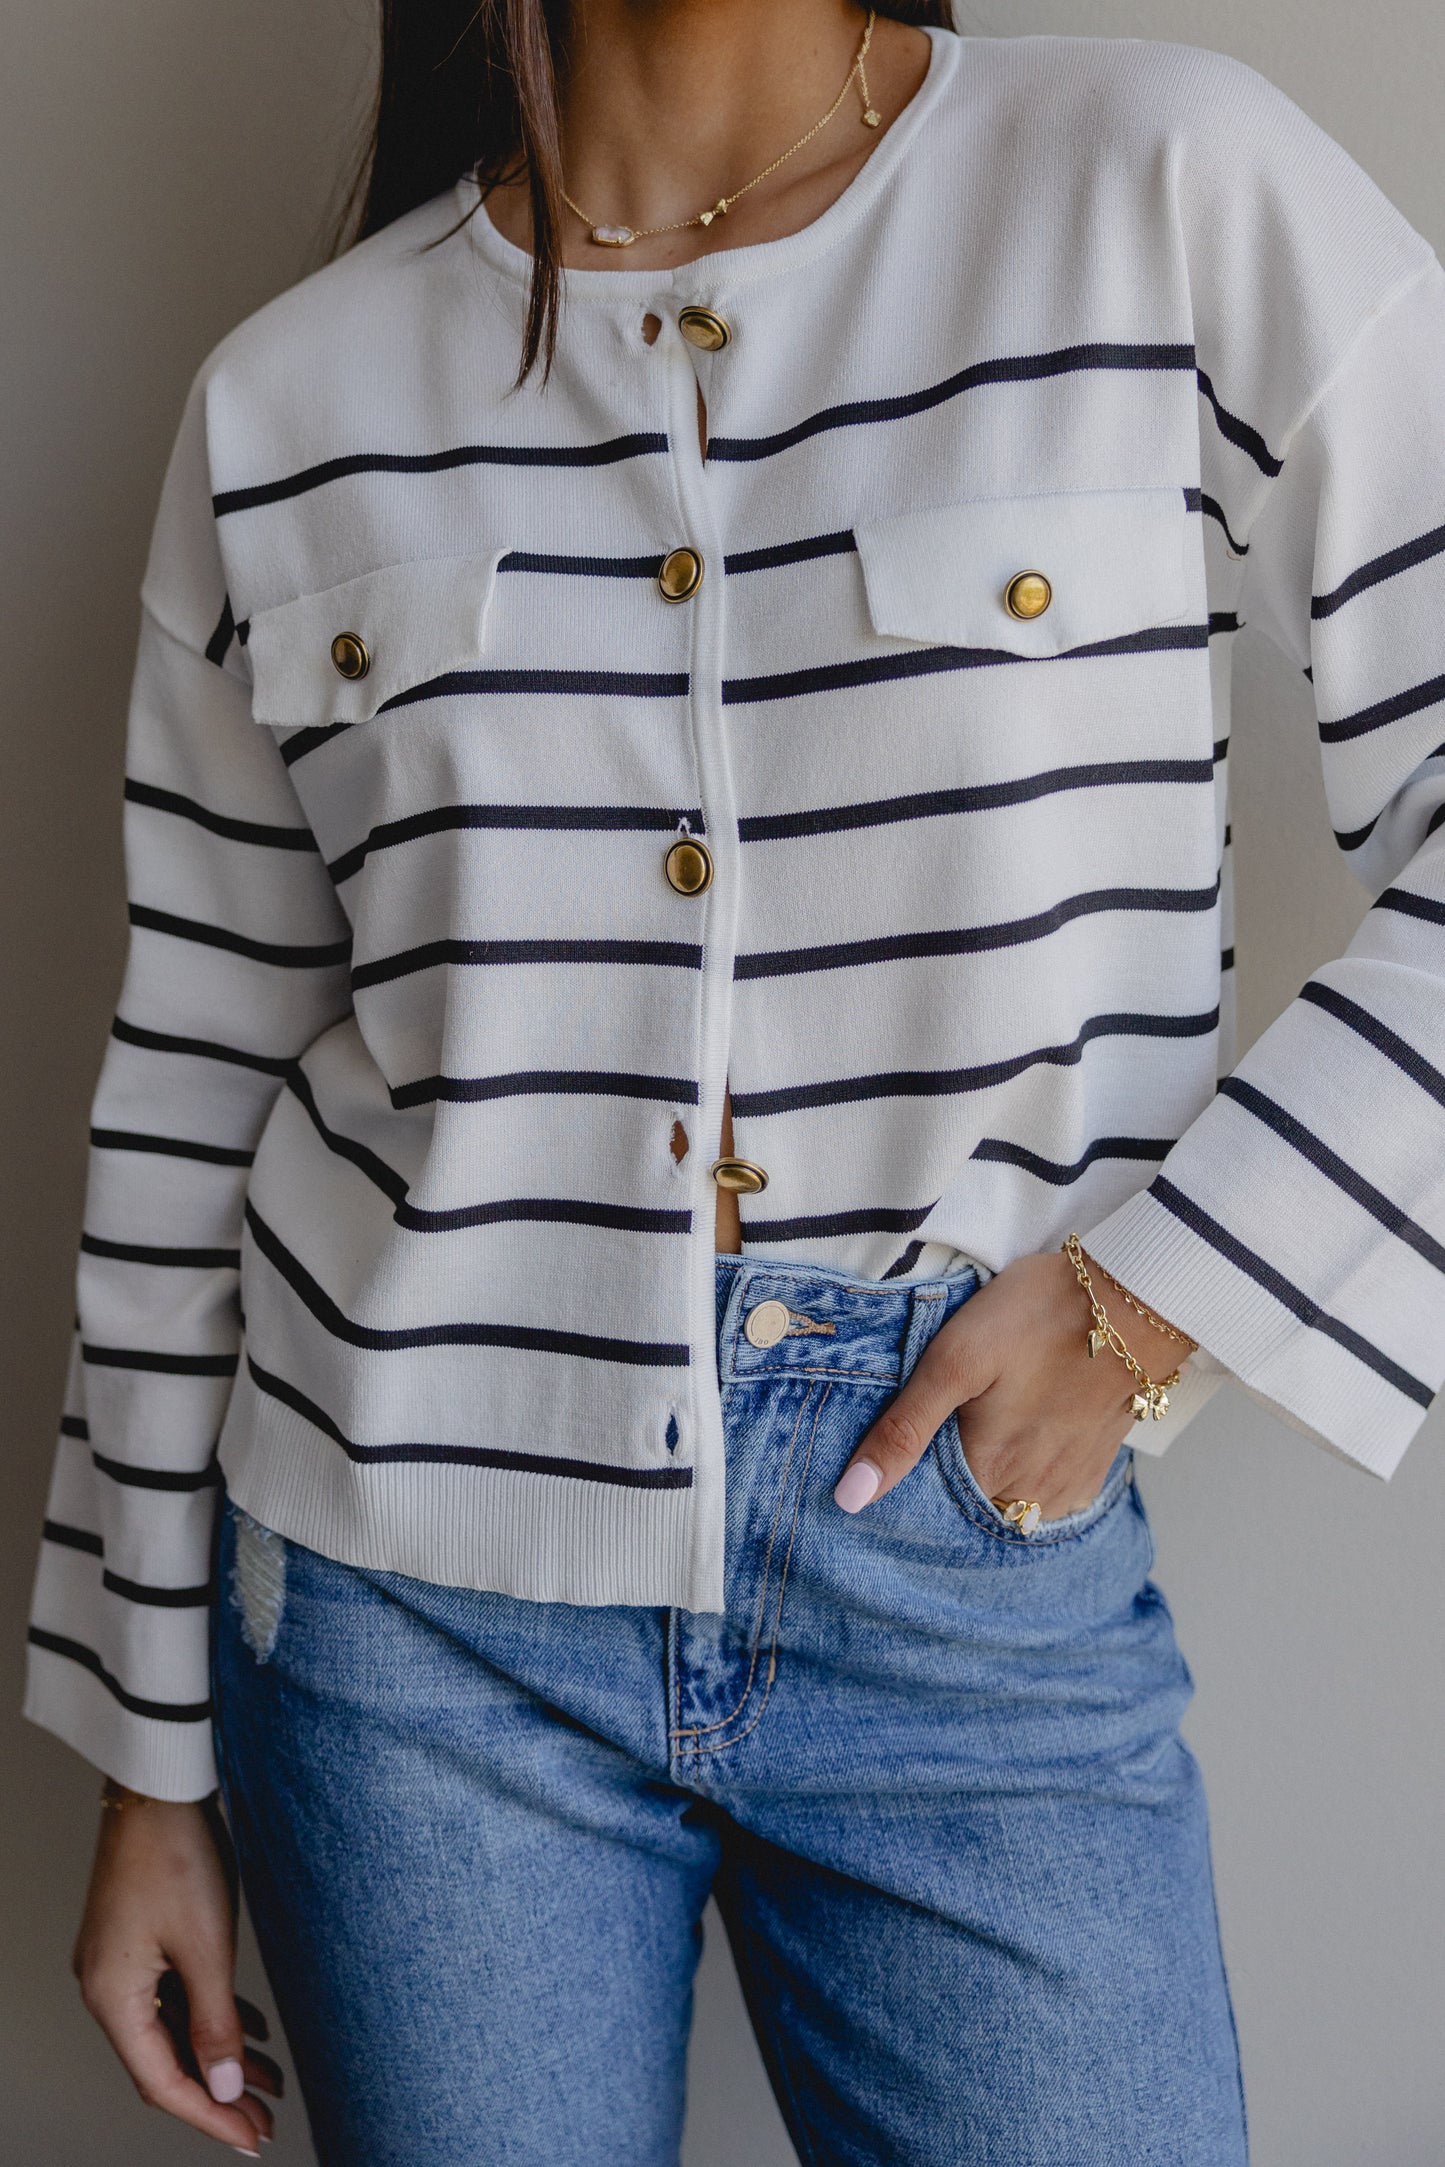 Can We Go Back Stripe Top White/Navy